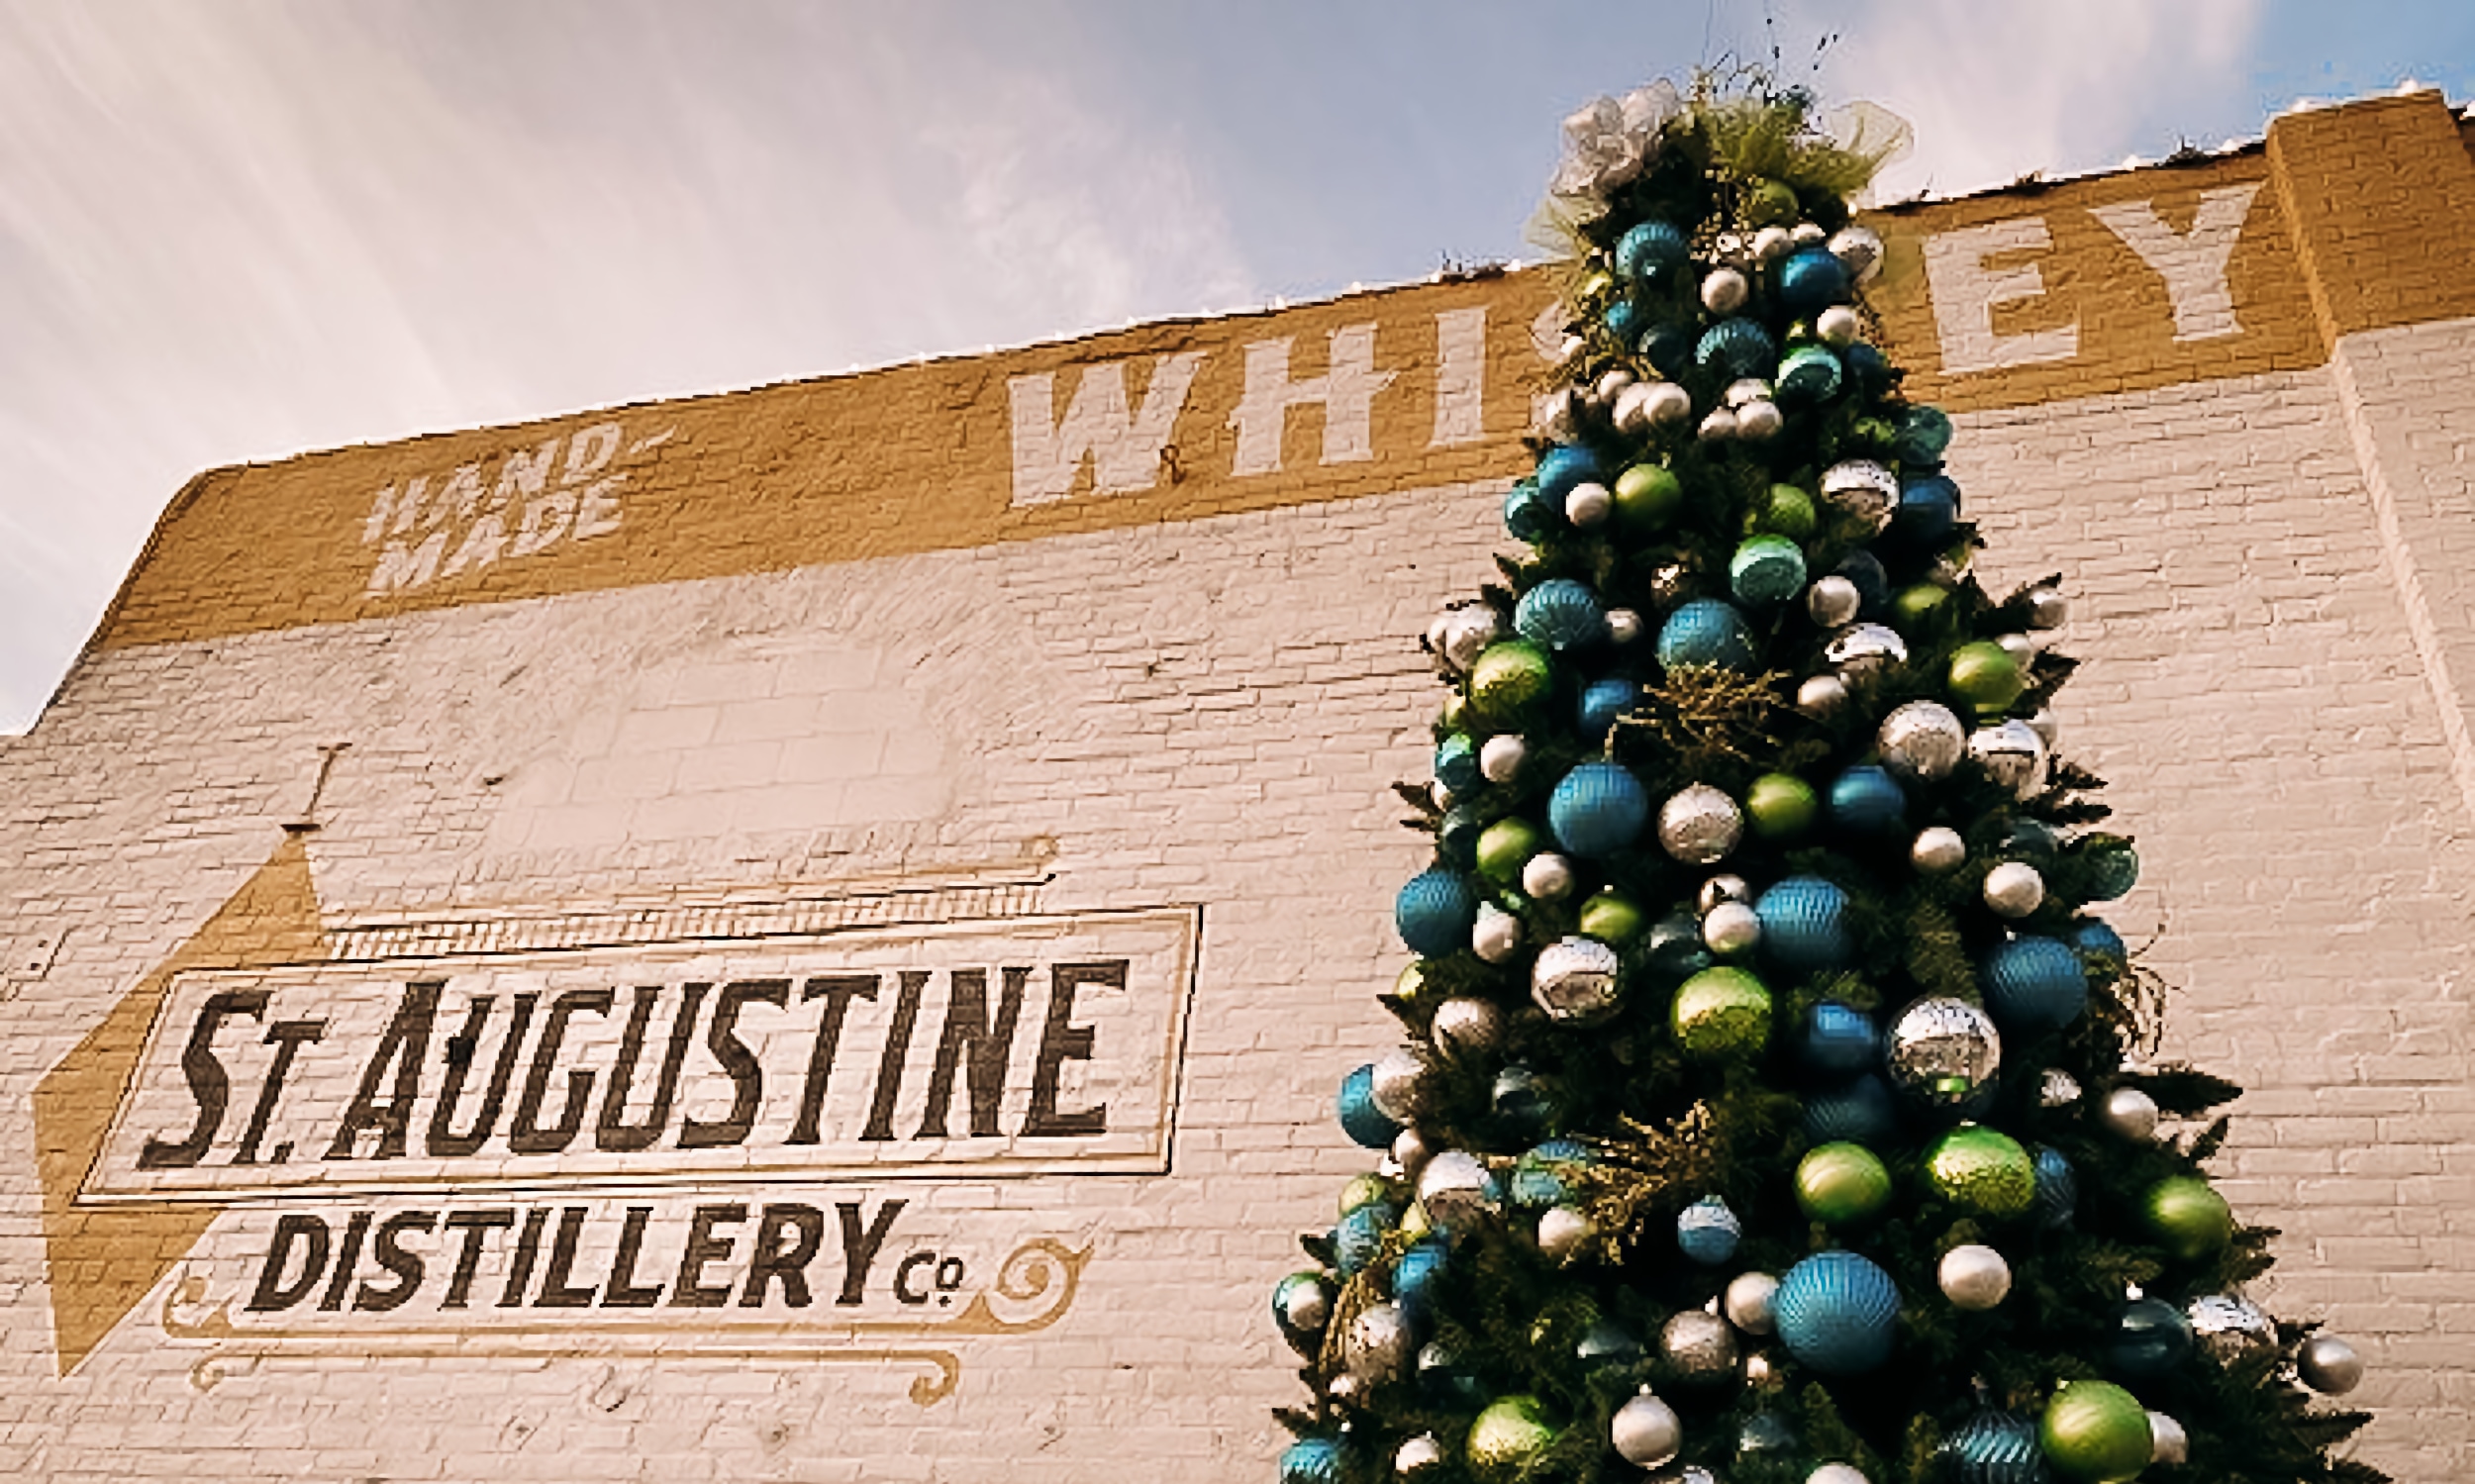 A tall Christmas tree with colorful globe ornaments, in front of the St. Augustine Distillery Building